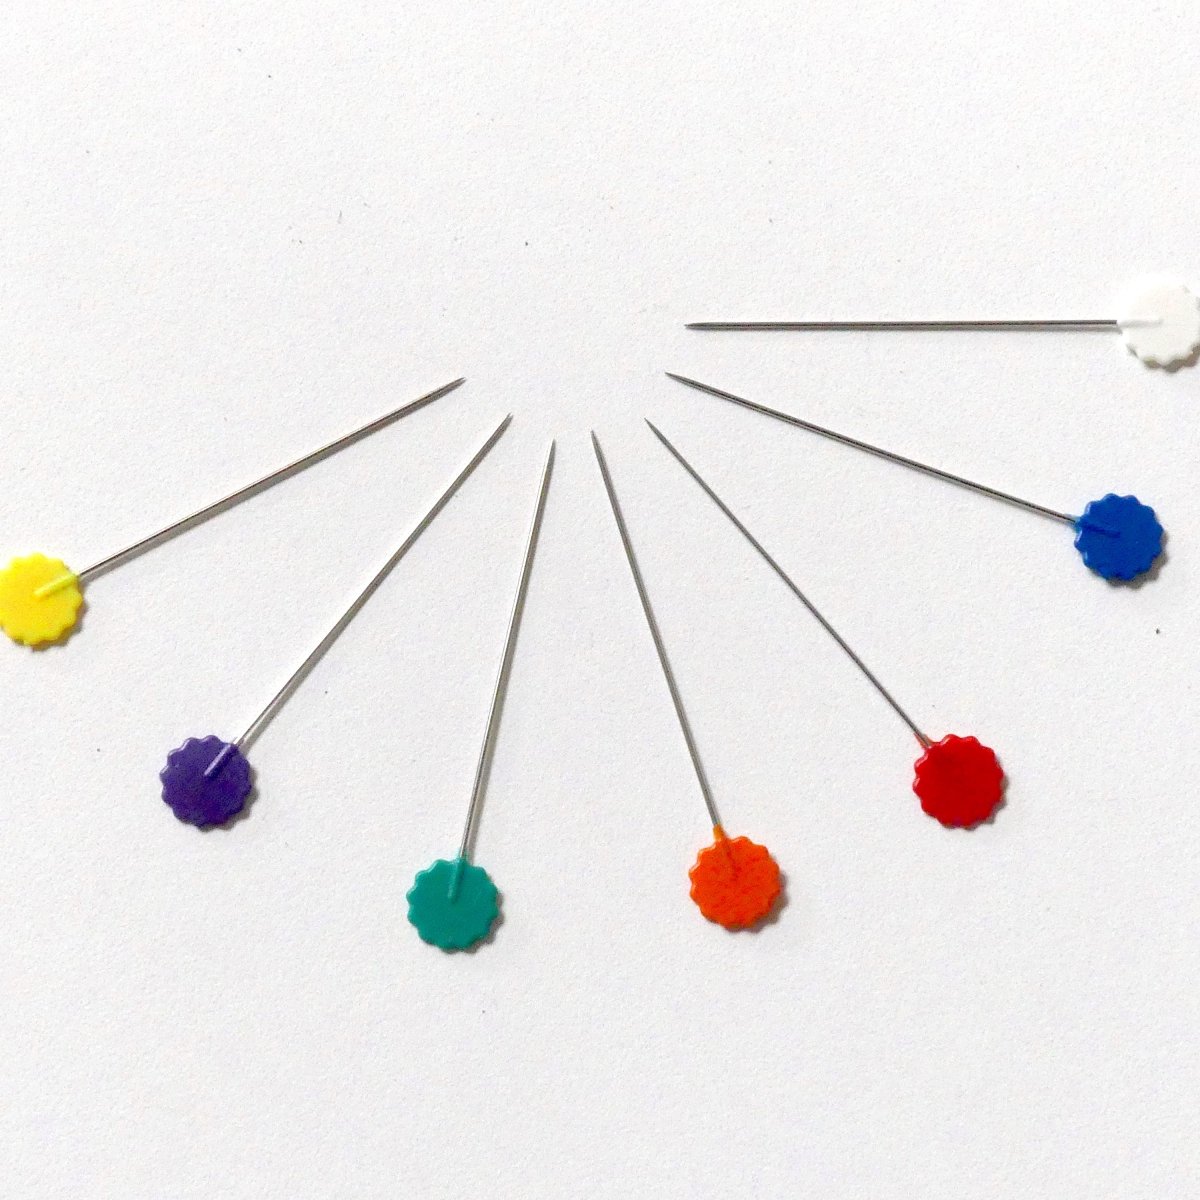 Sewing Pins - Pin Toppers - Gift for Quilters - Decorative Sewing Pins -  Fancy Pins - Scrapbooking Pins - Quilting Pins - Flower Pins